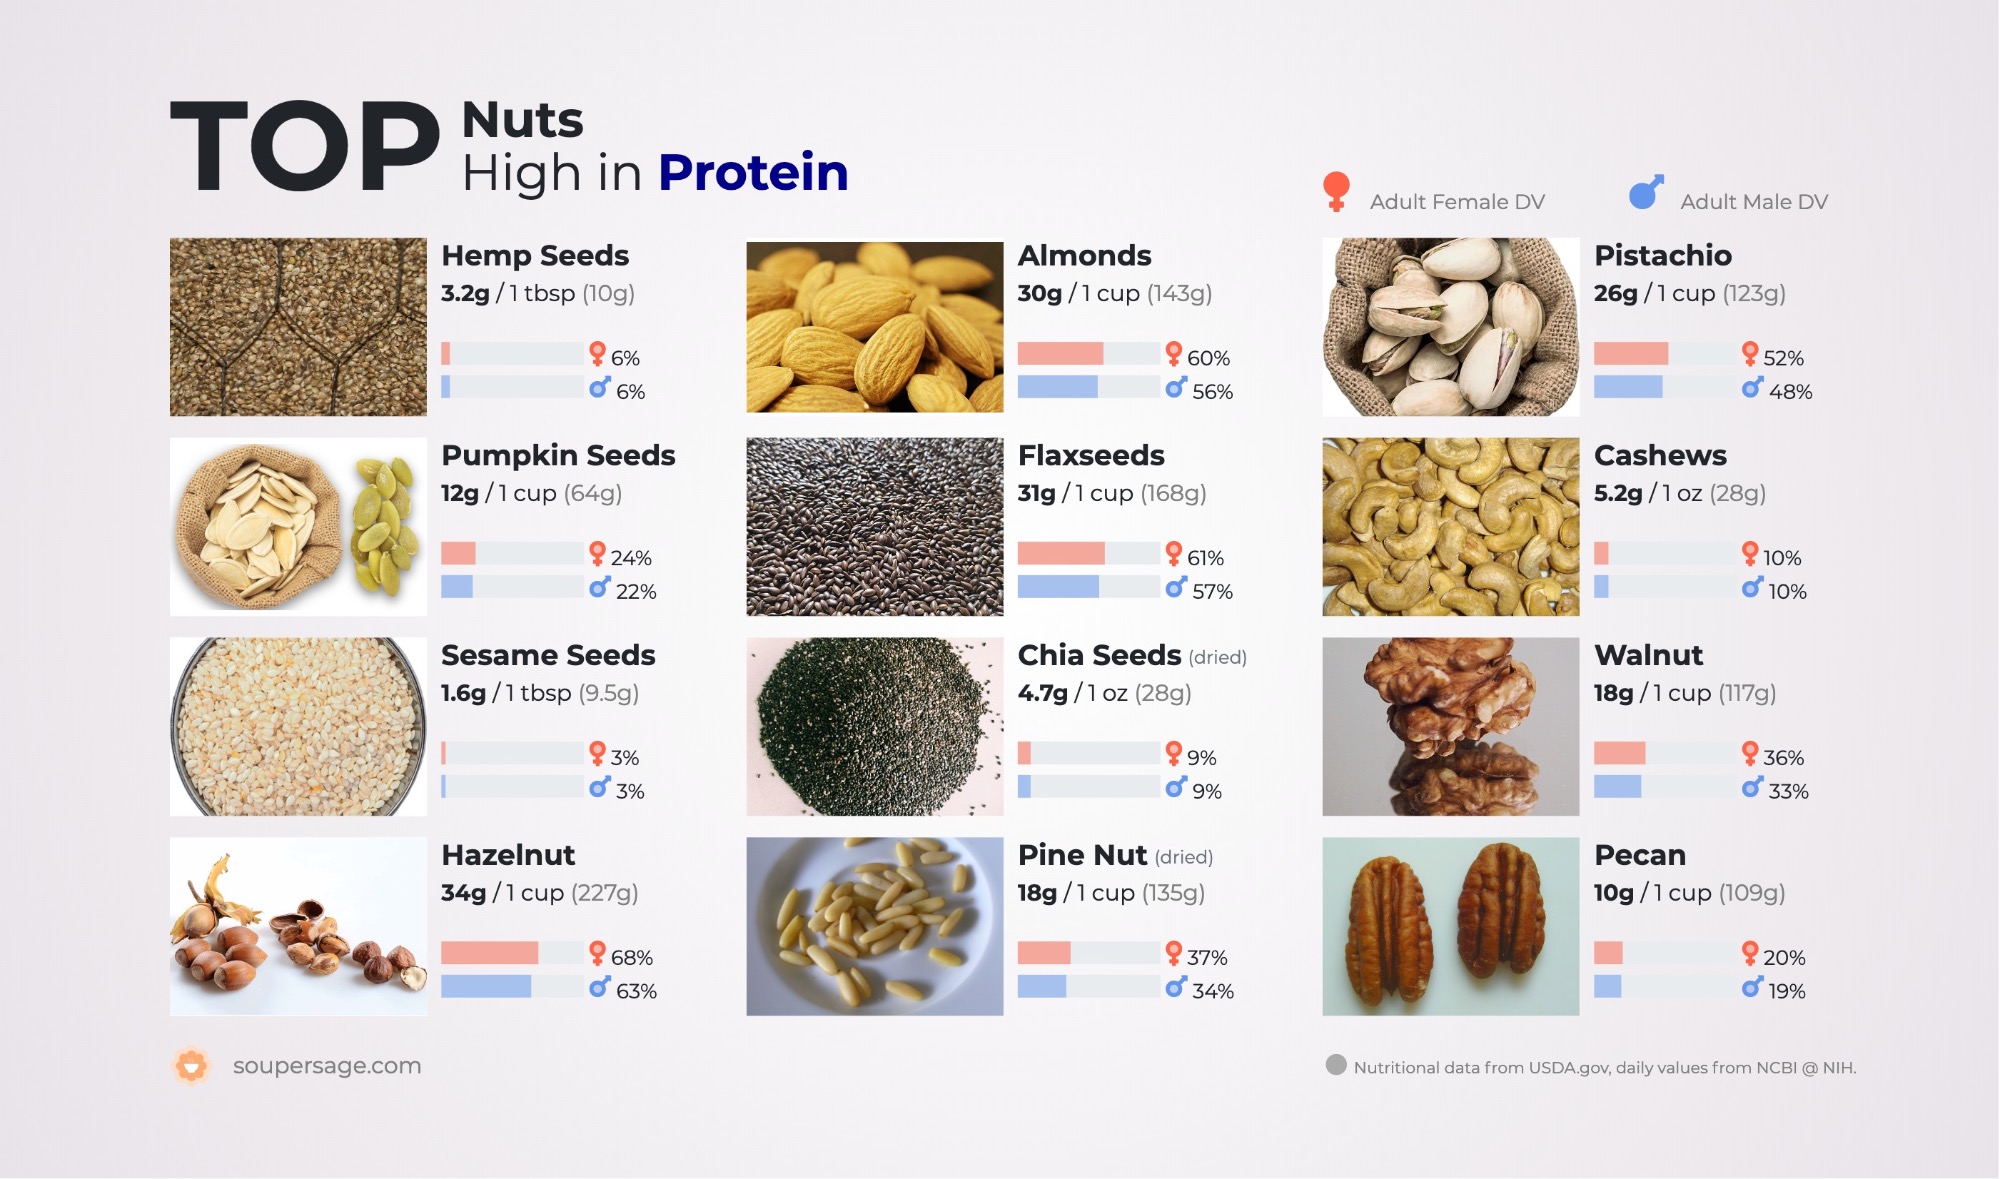 image of Top Nuts High in Protein